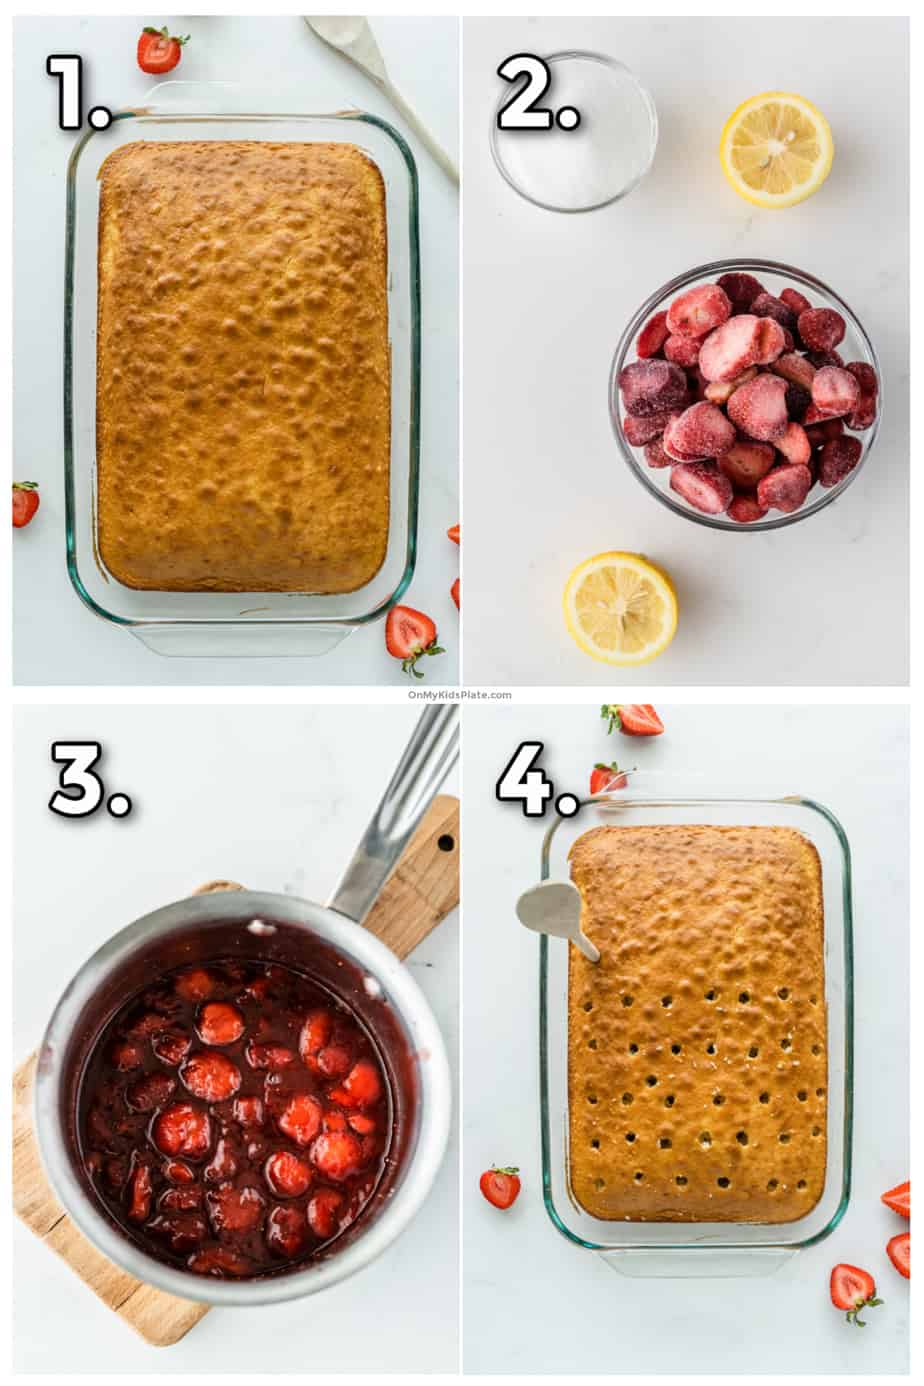 Showing steps of how to make a strawberry poke cake. First baking cake, then making strawberry sauce and poking holes in cake